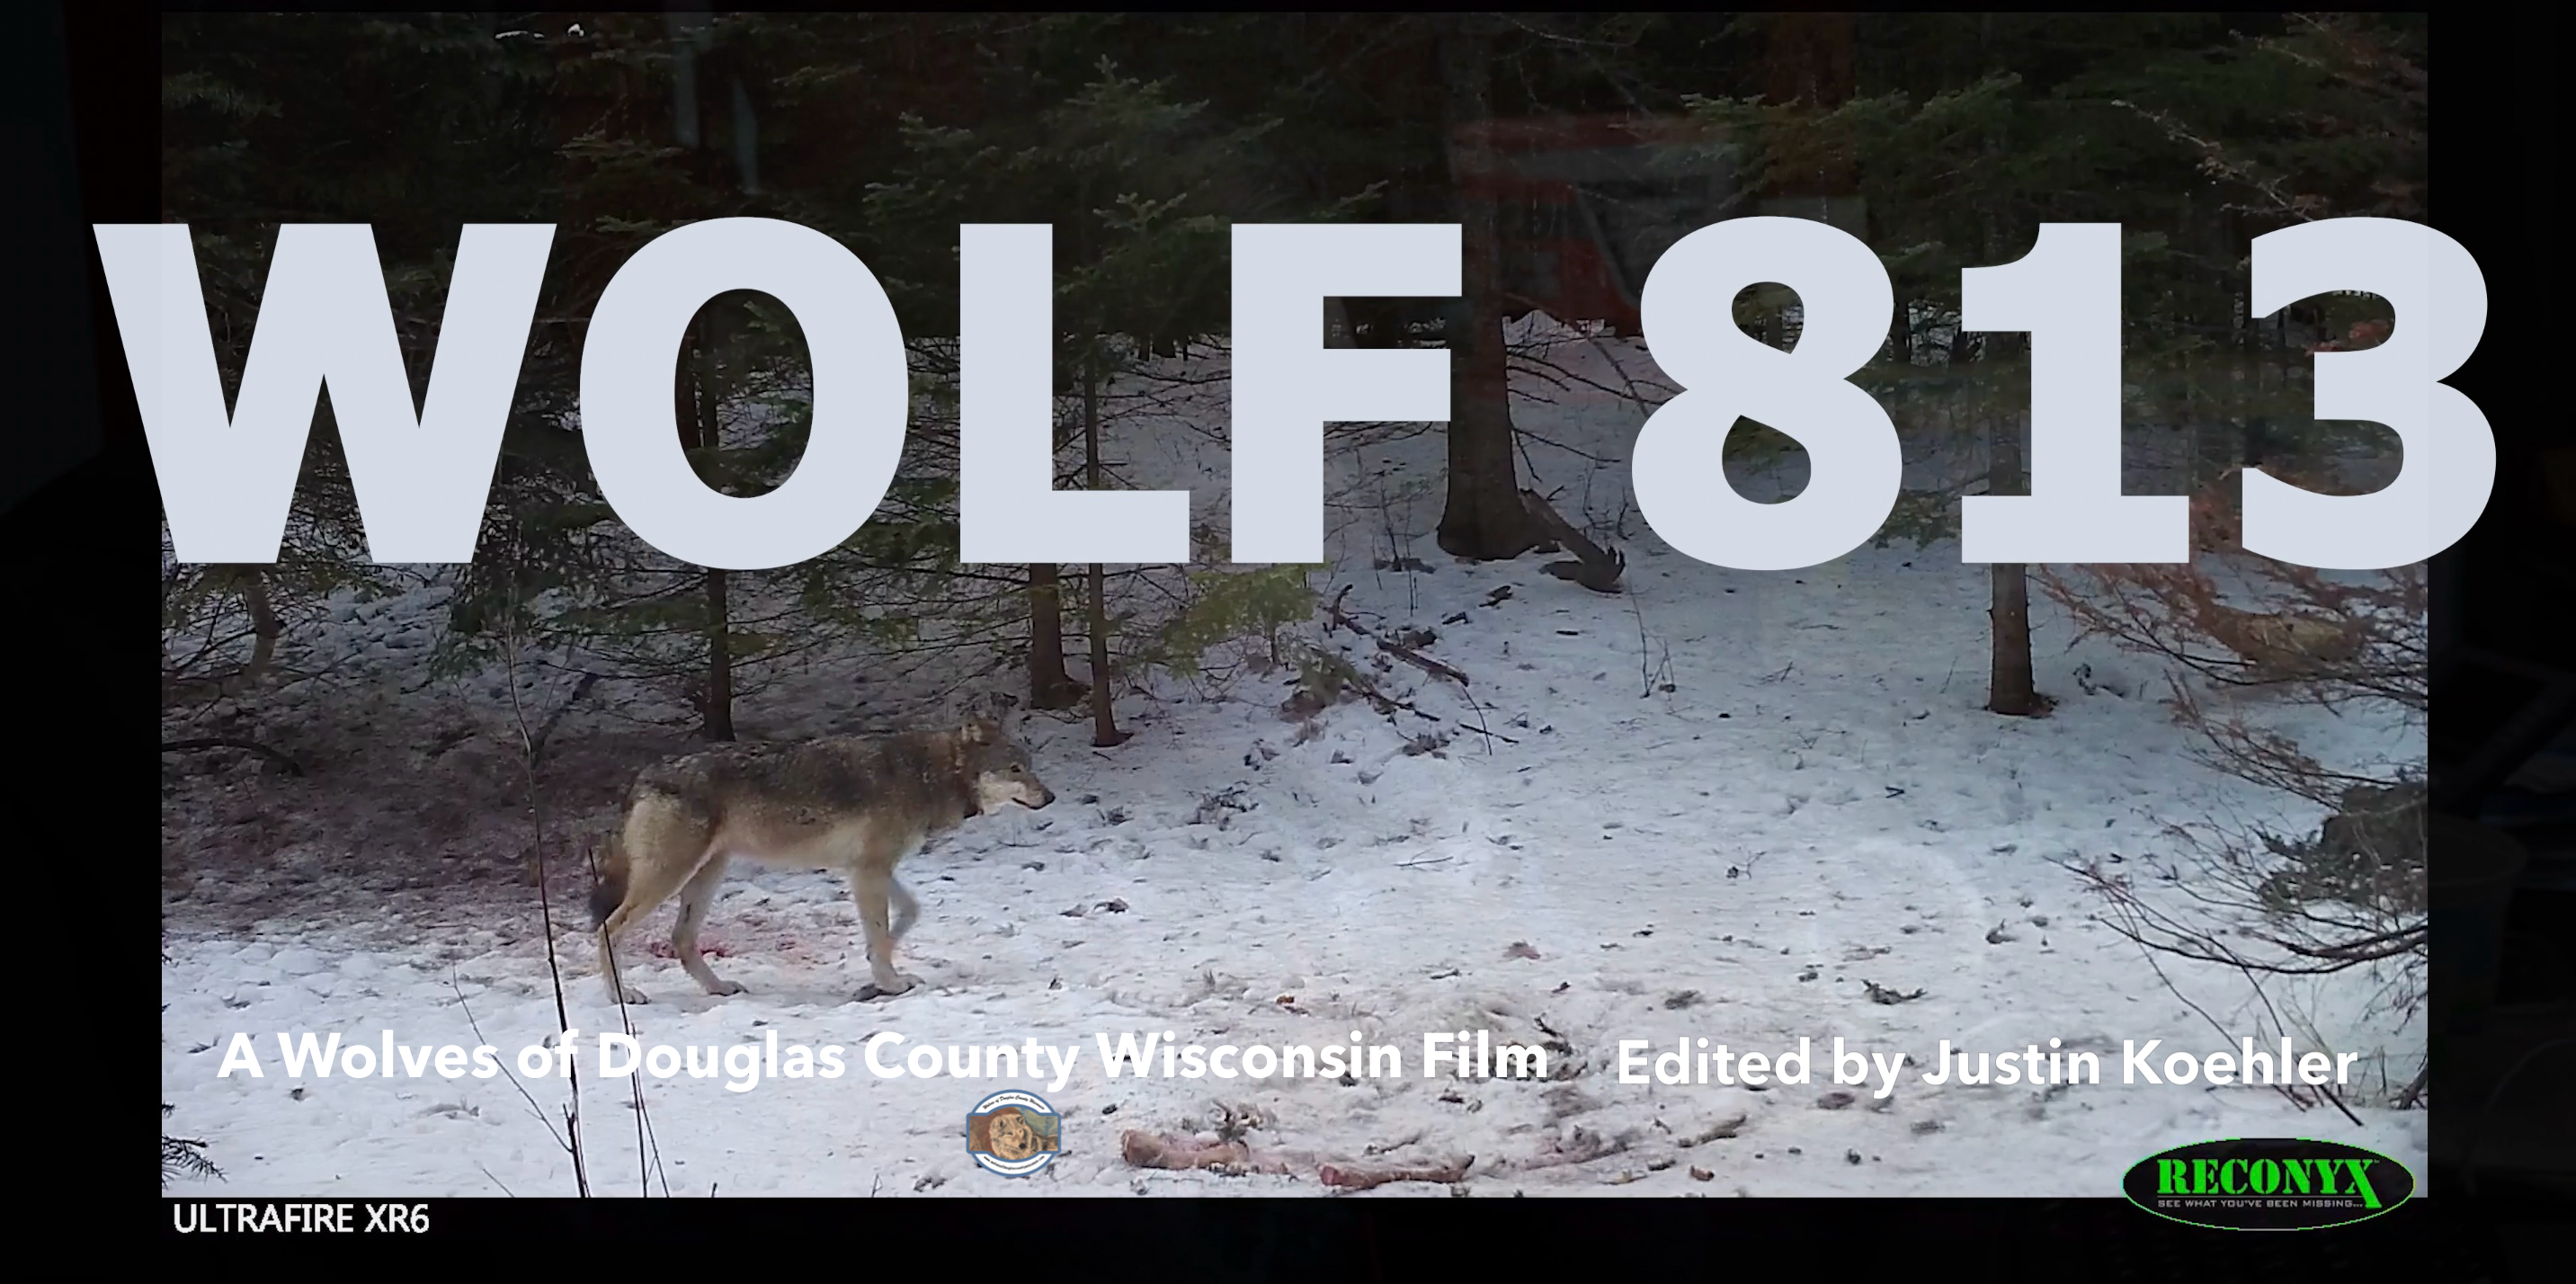 More Than Just a Wolf. A Short Film: Wolf 813.